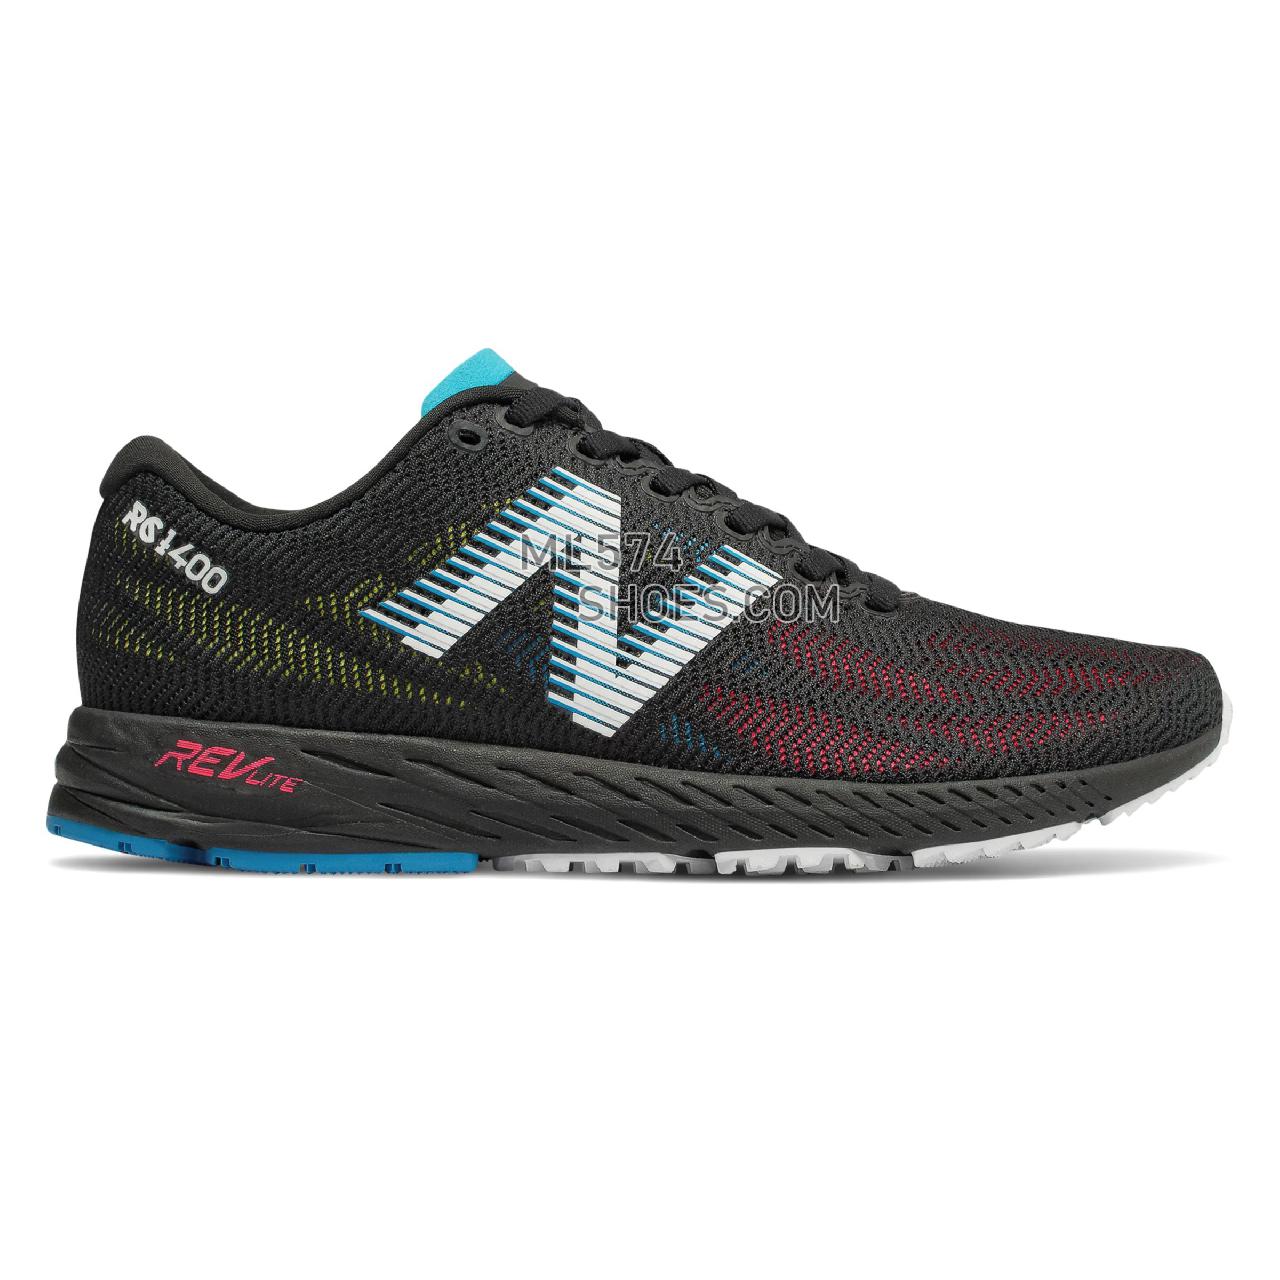 New Balance 1400v6 - Women's 1400 - Running Black with Pink Zing - W1400BC6